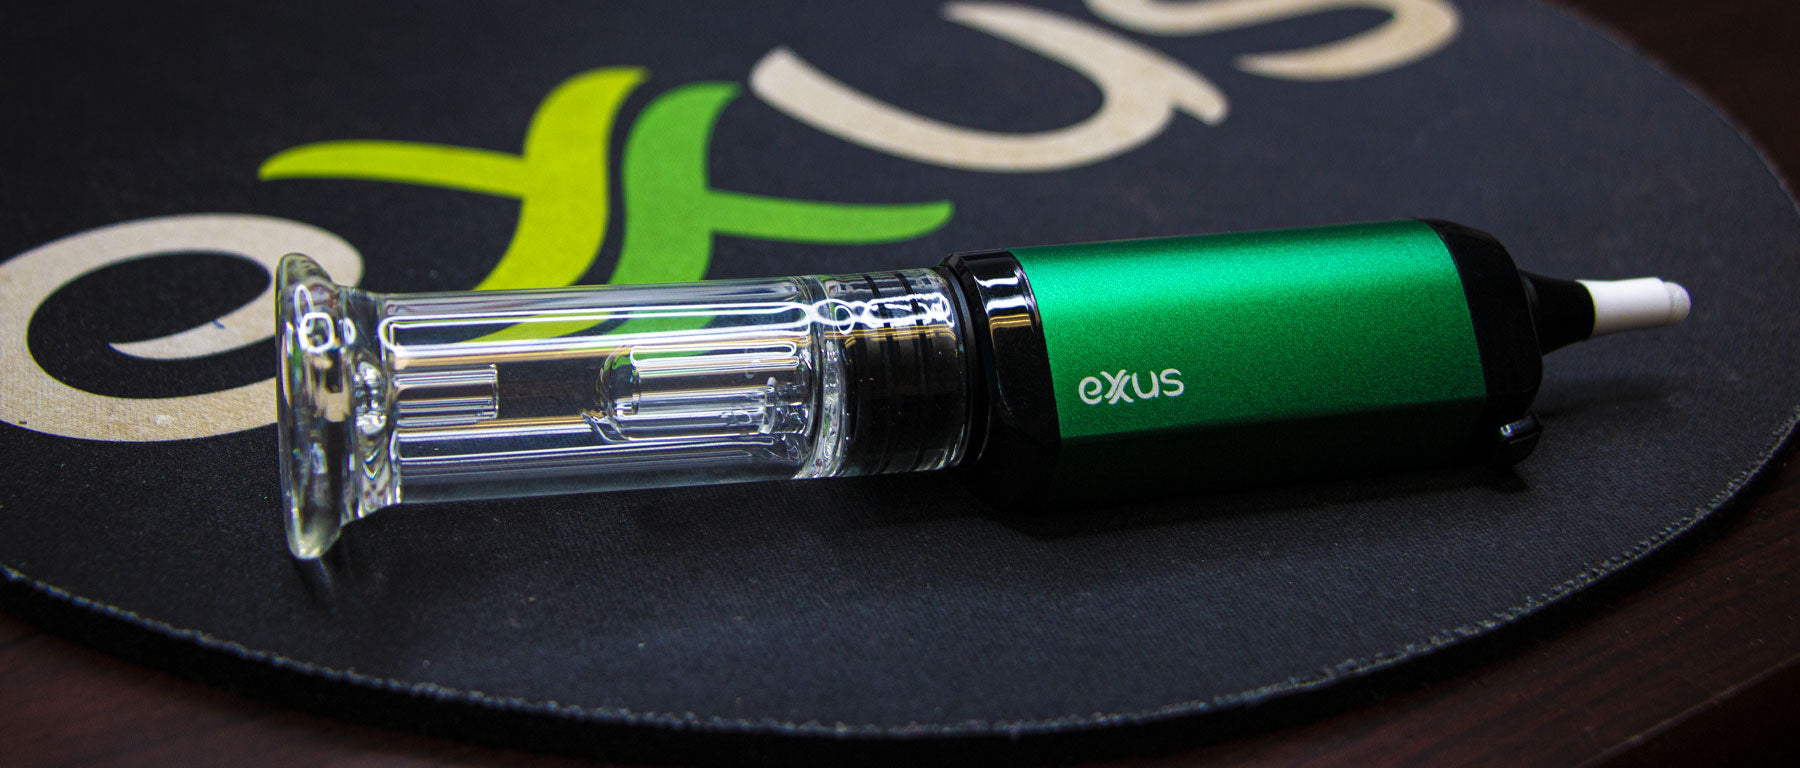 Green Exxus VRS Nectar Collector Concentrate Vaporizer laying down on mouse pad with Exxus Logo